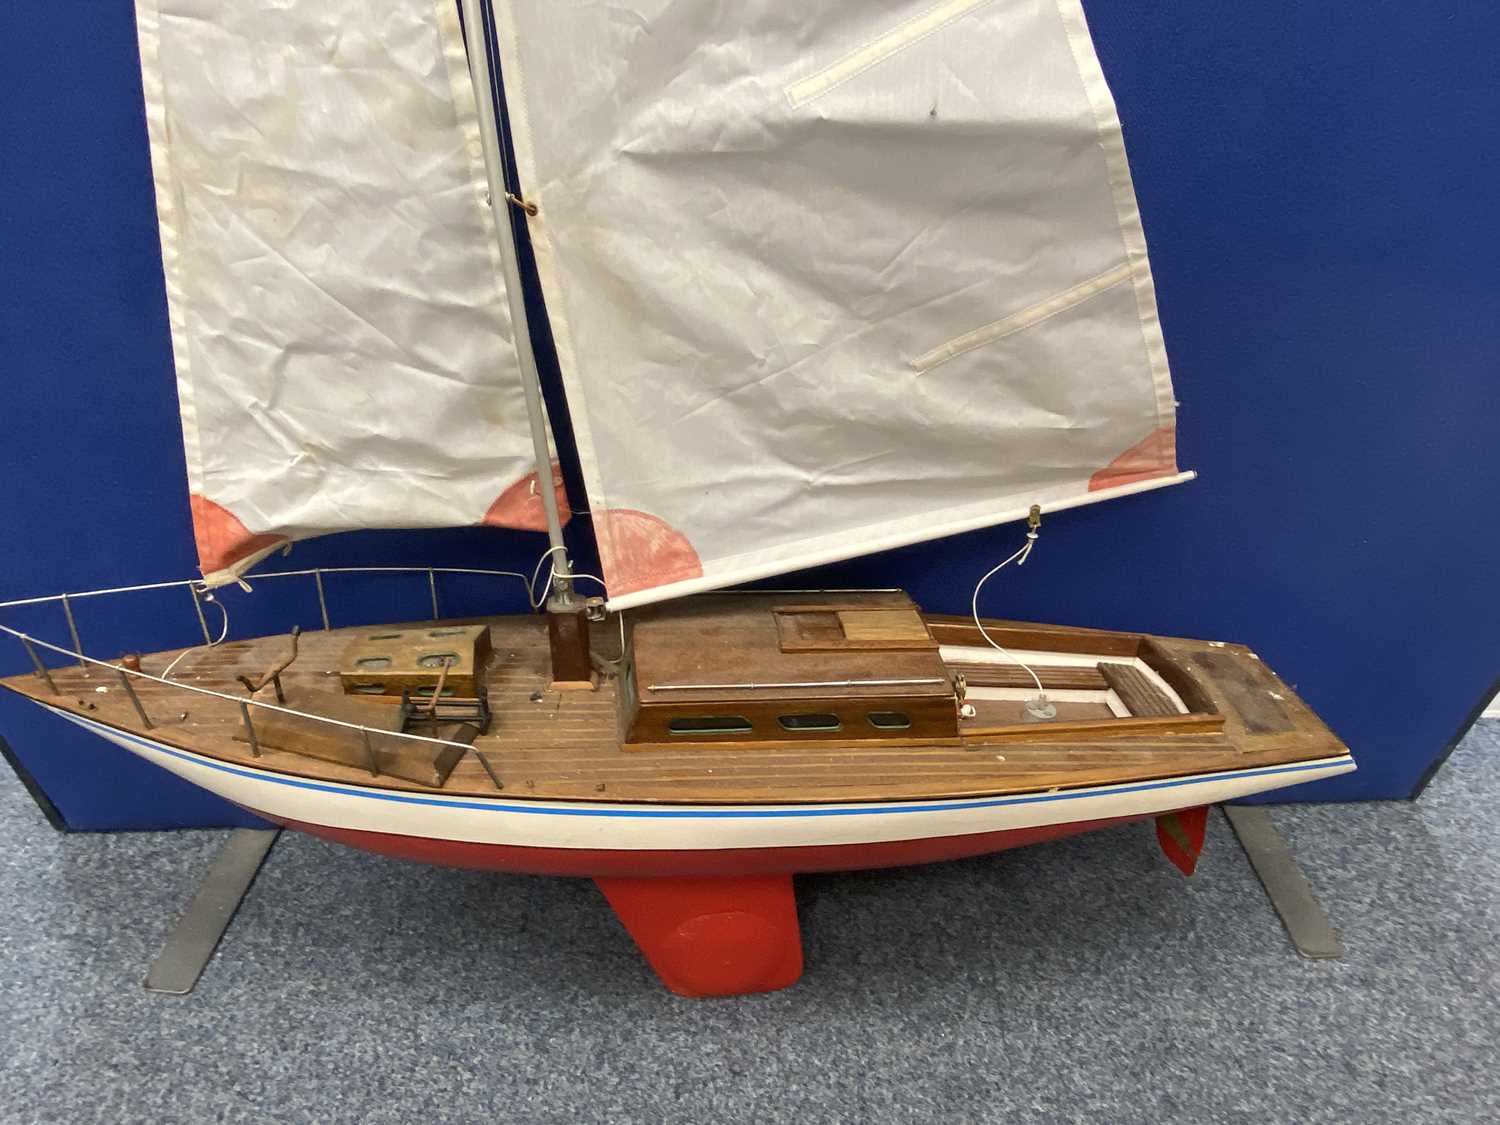 SCALE MODEL YACHT - 'Del Bach', of wooden construction, with cream and red hull, red weighted keel - Image 4 of 5